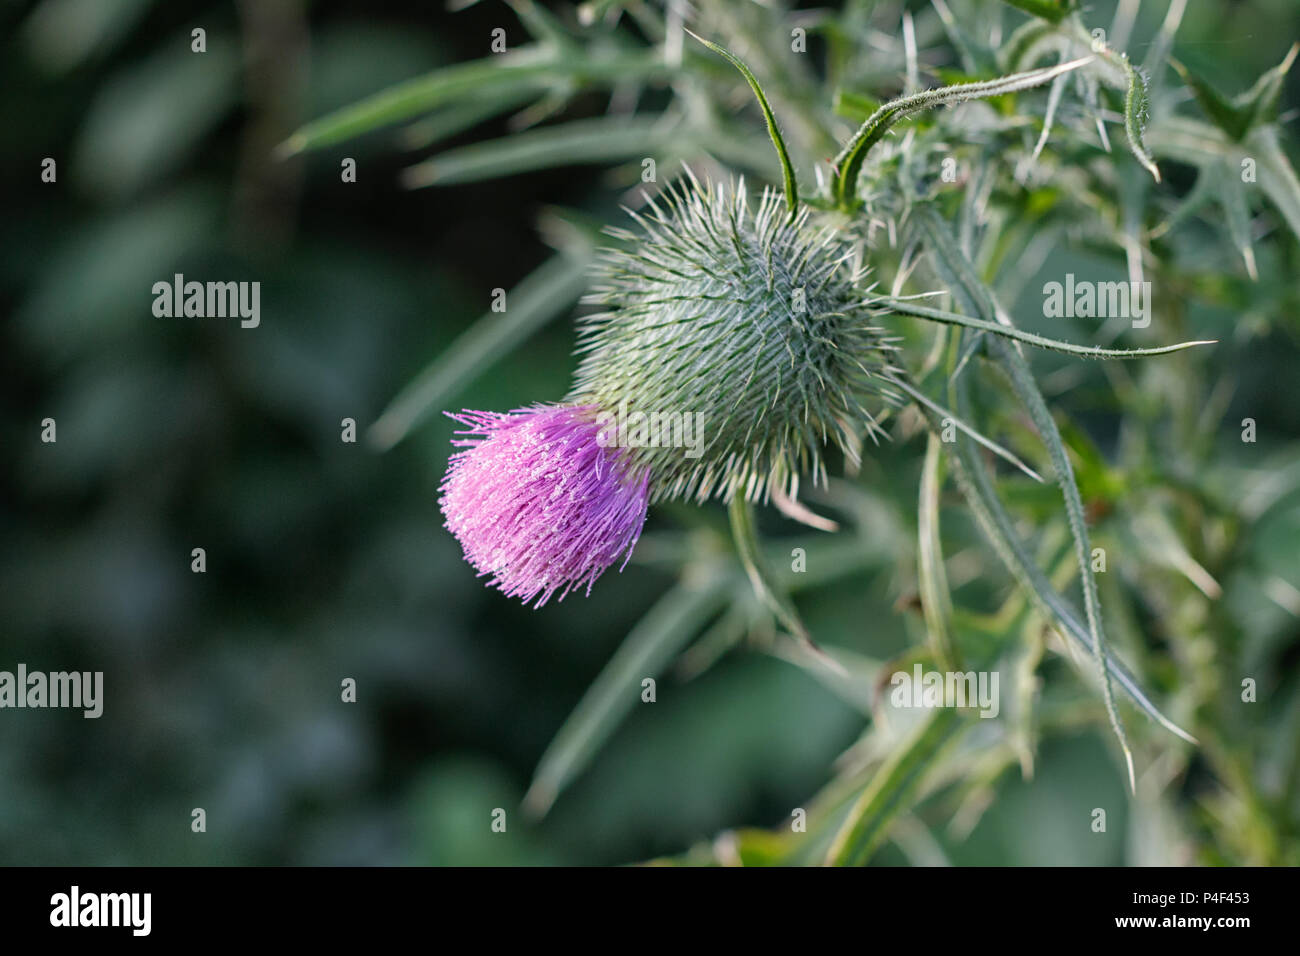 Pink flowering thistle also known as Common Thistle or Virginia Thistle. Stock Photo